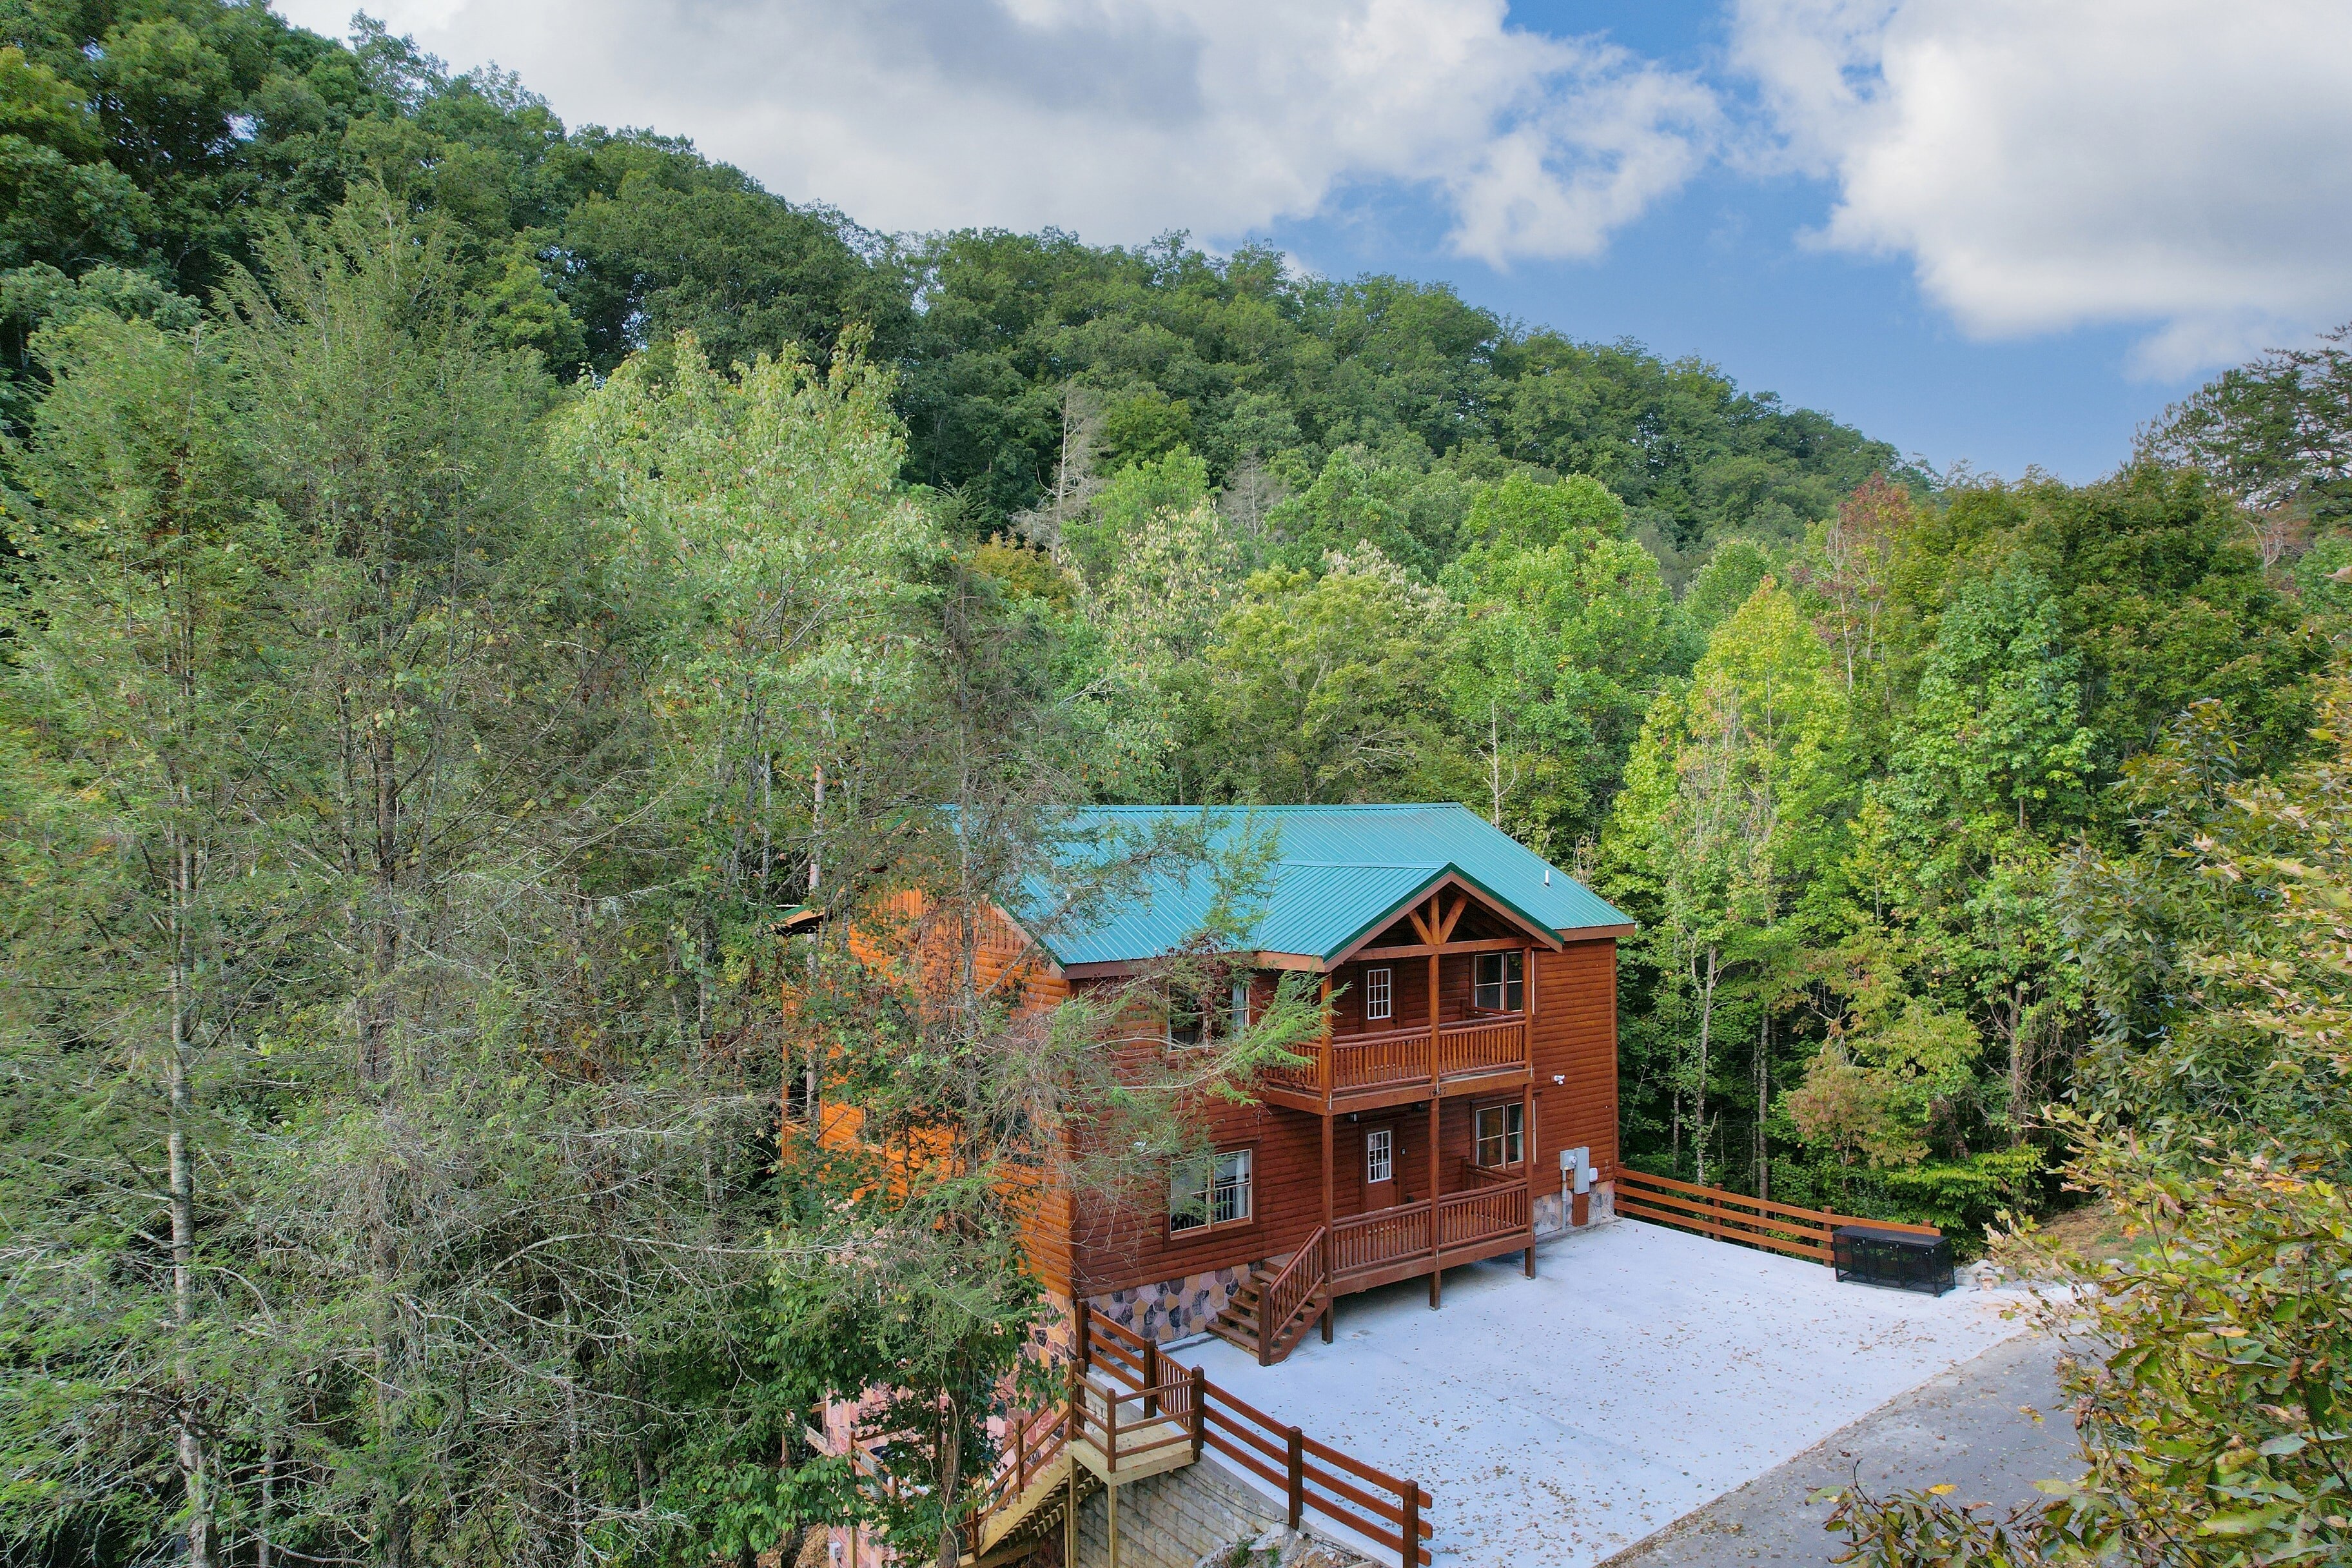 Welcome to Bluestem and Bluebell, your two home buyout in Smoky Mountains!